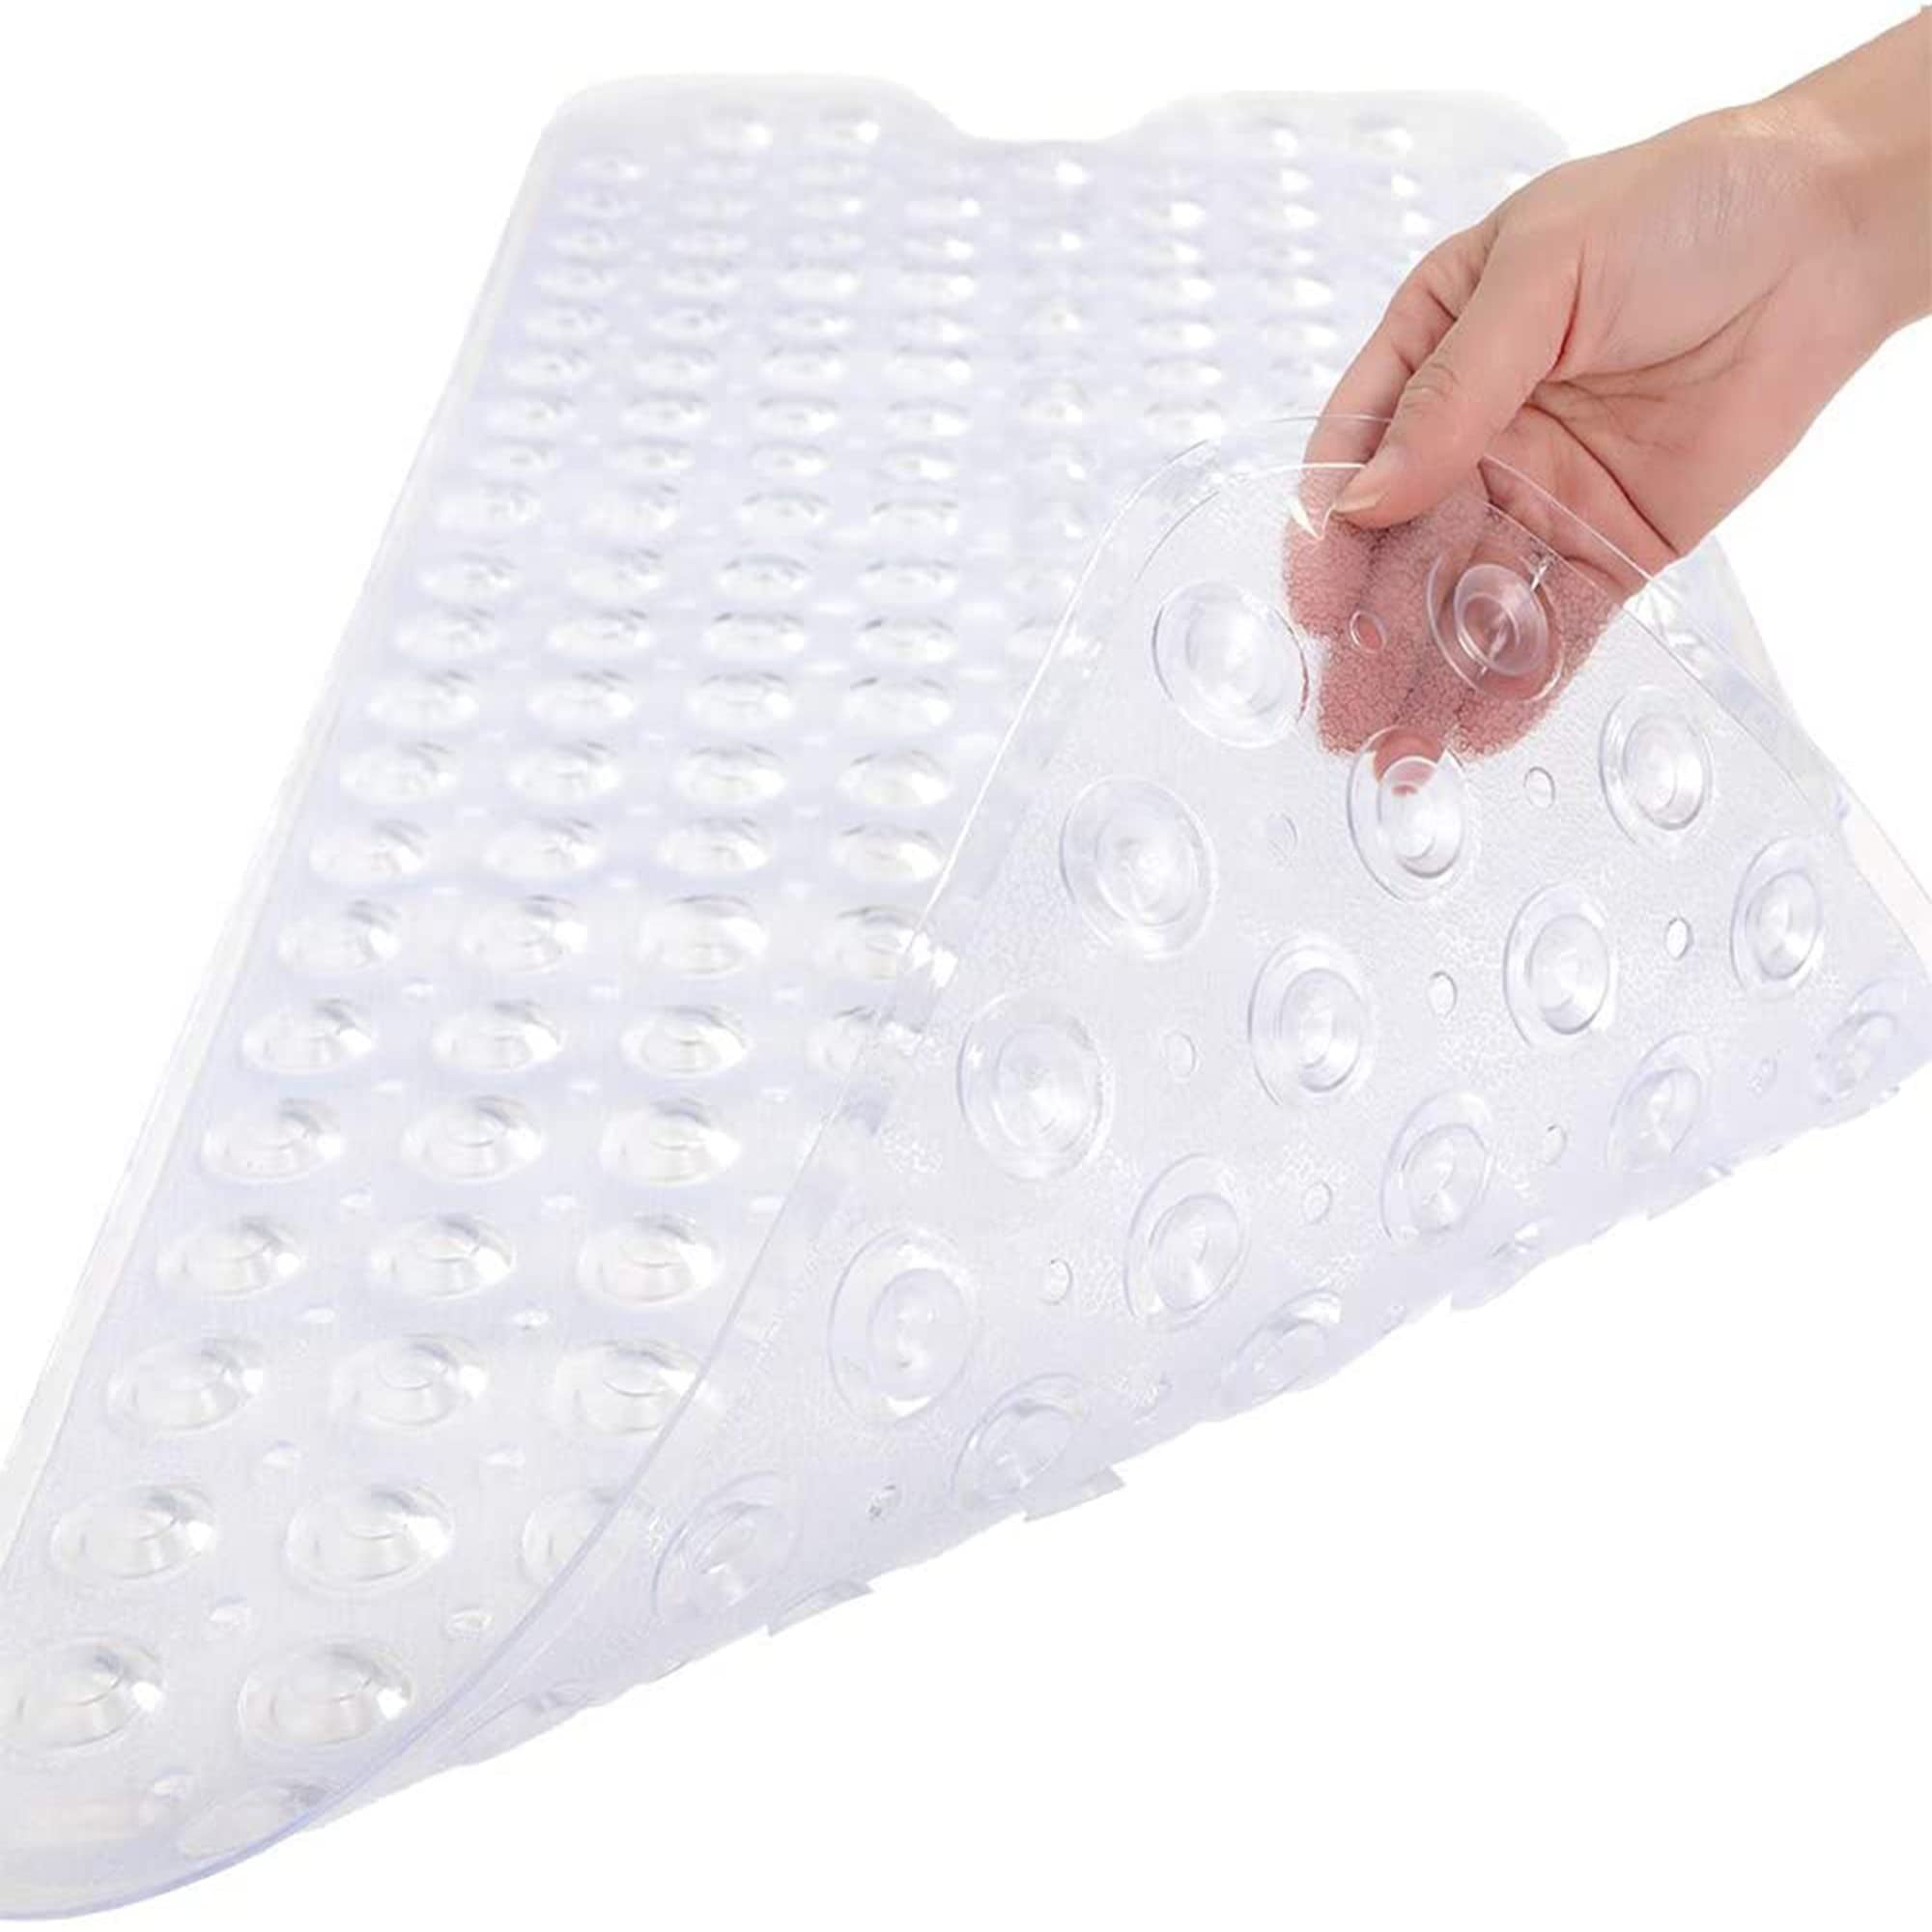 Shower Mat Without Suction Cups for Reglazed Surface